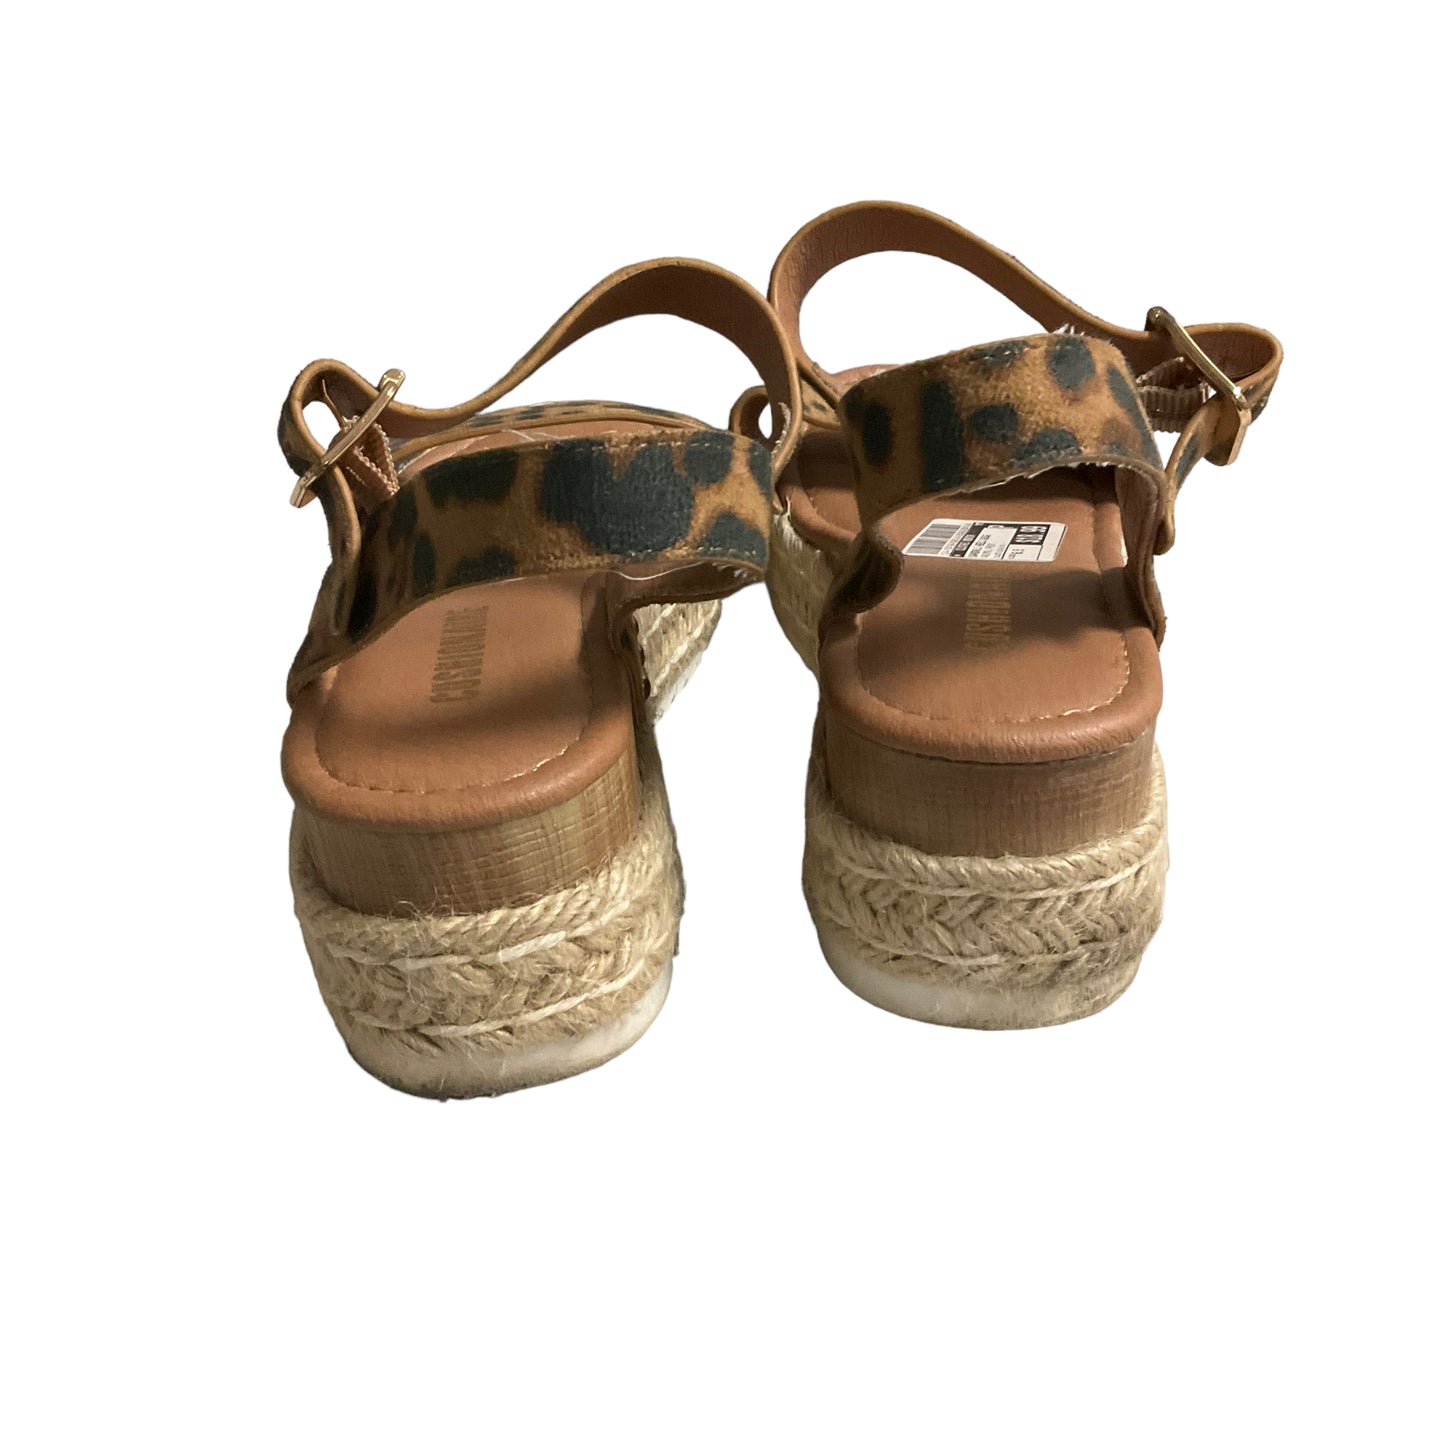 Sandals Heels Wedge By Cushionaire  Size: 6.5